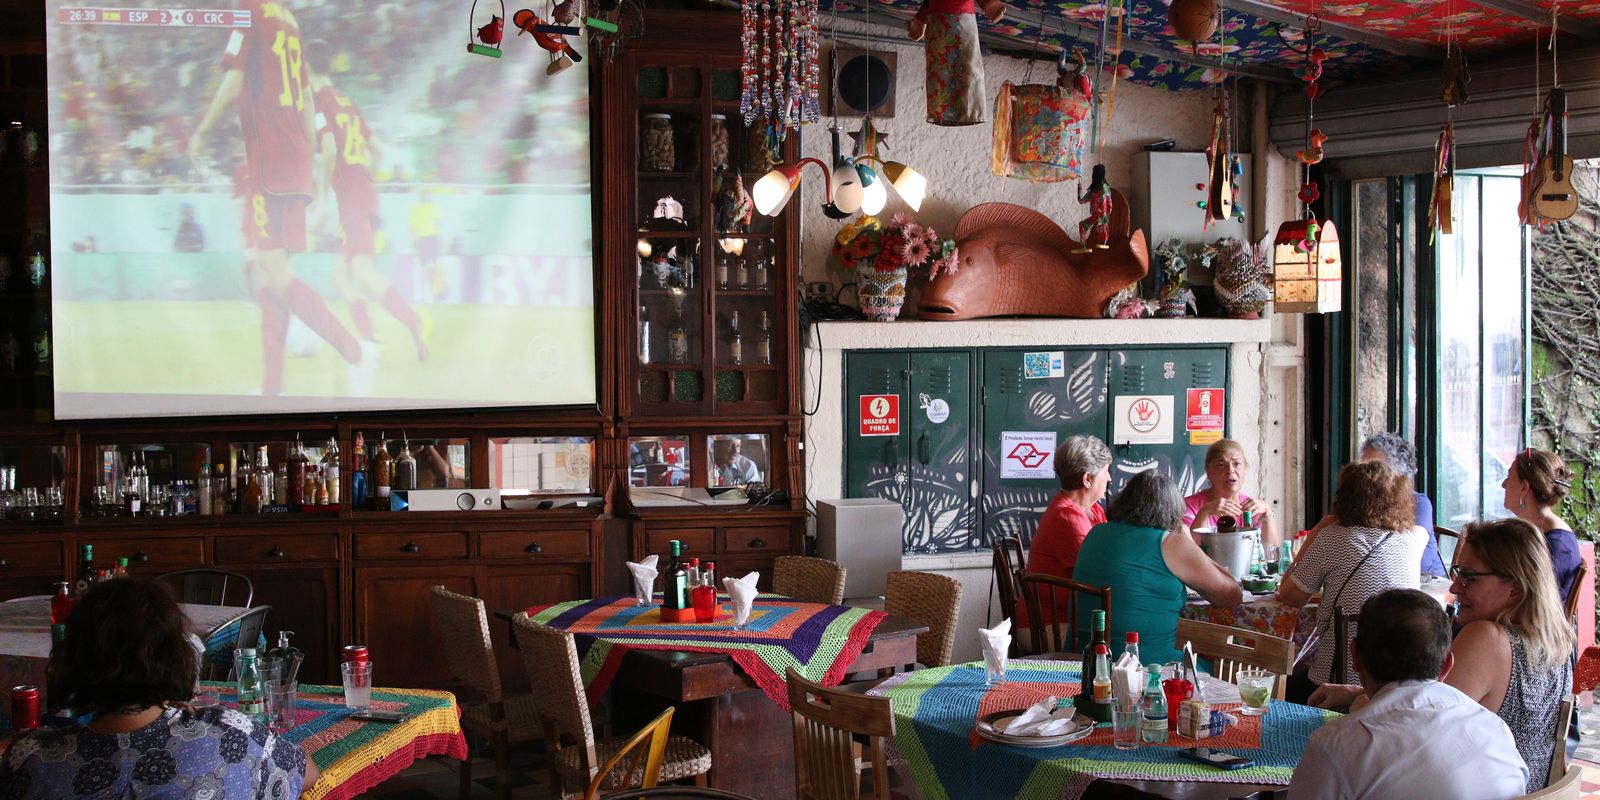 Movement in bars and restaurants should grow 30% in the World Cup
– News X